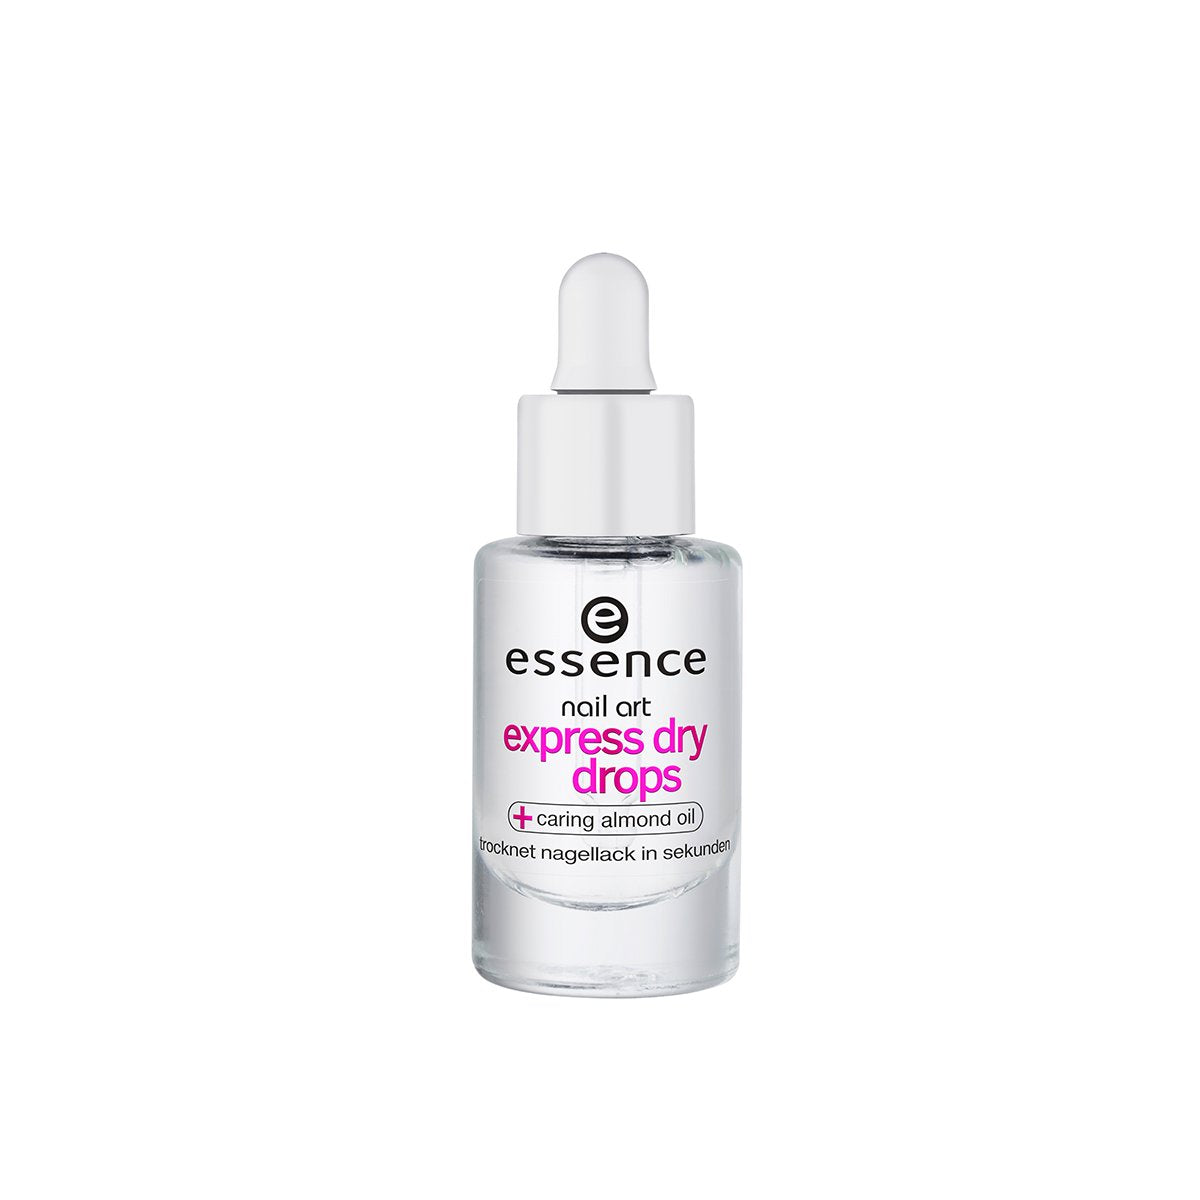 essence Express Dry Drops